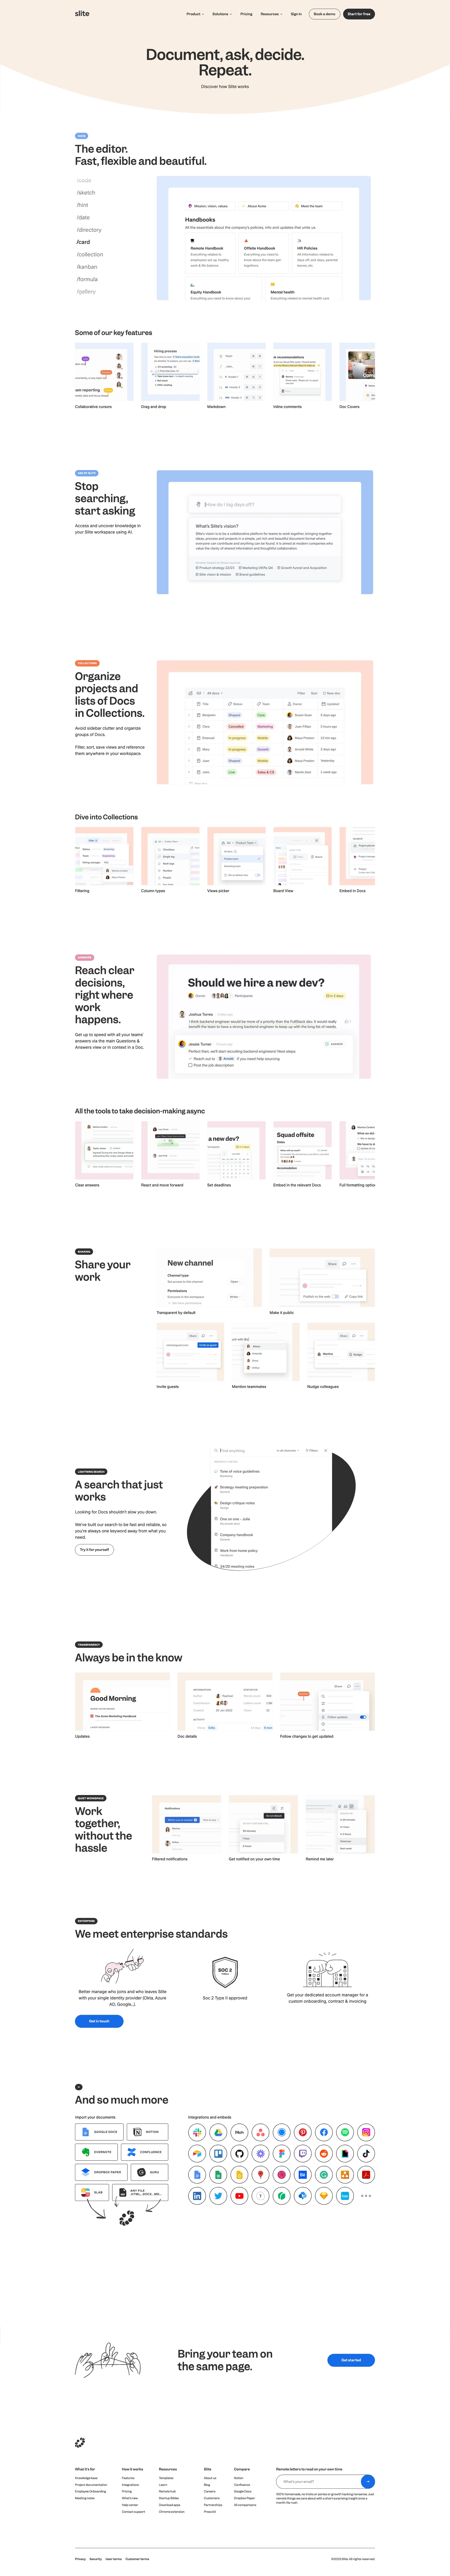 Slite Landing Page Example: Your team's go-to for instant answers. Slite's AI-powered knowledge base is the fastest way to access trusted company information. From onboarding guides to all-hands notes — just ask Slite for it.